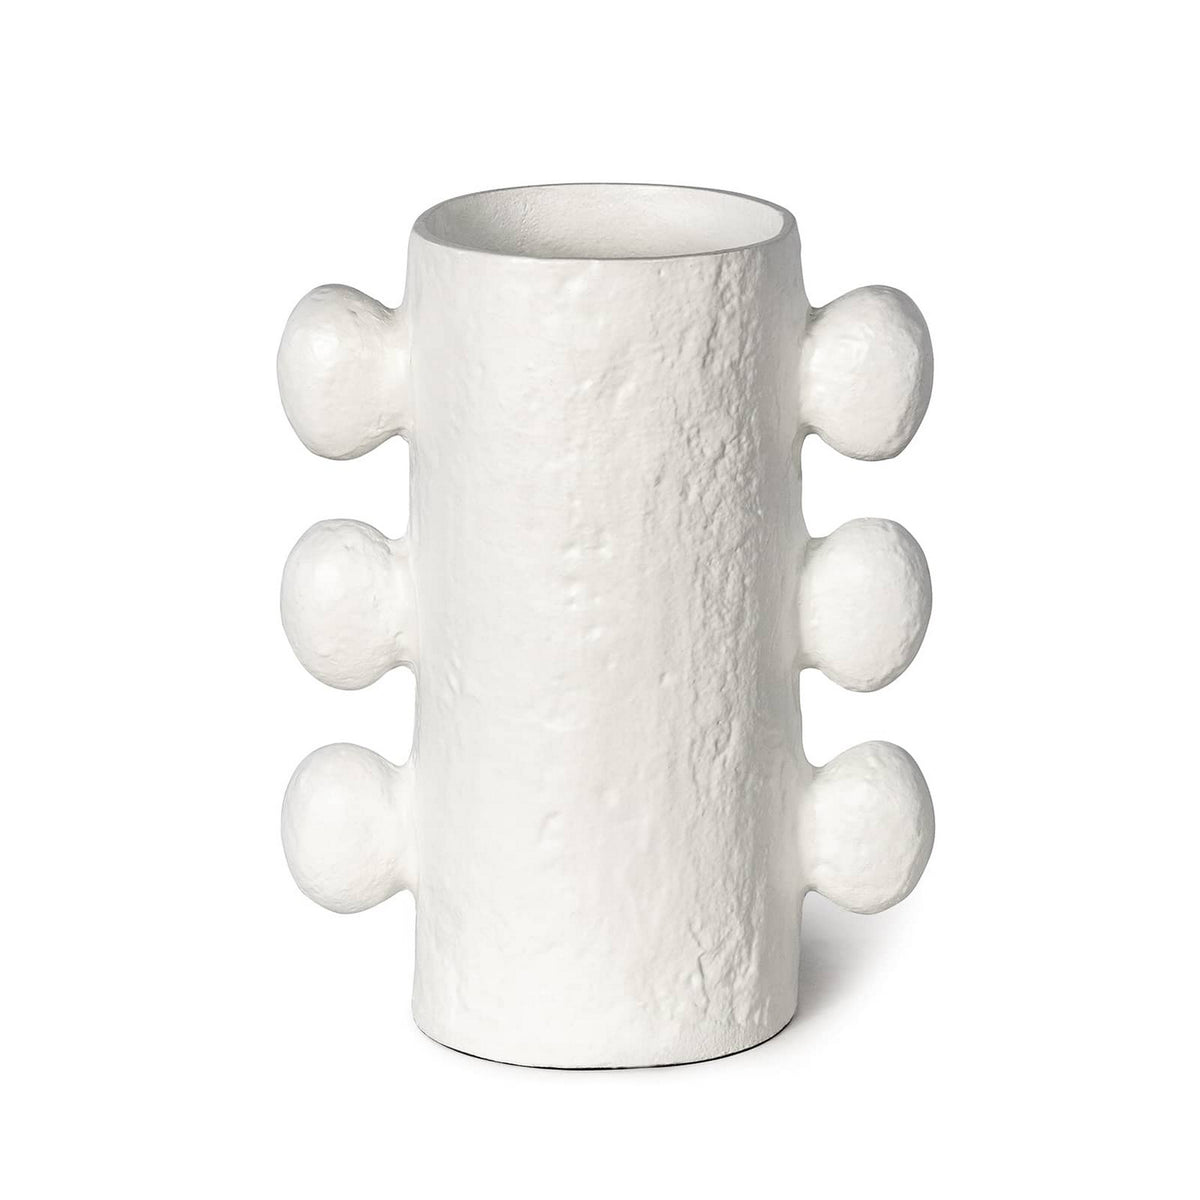 Regina Andrew Vase from the Sanya collection in White finish